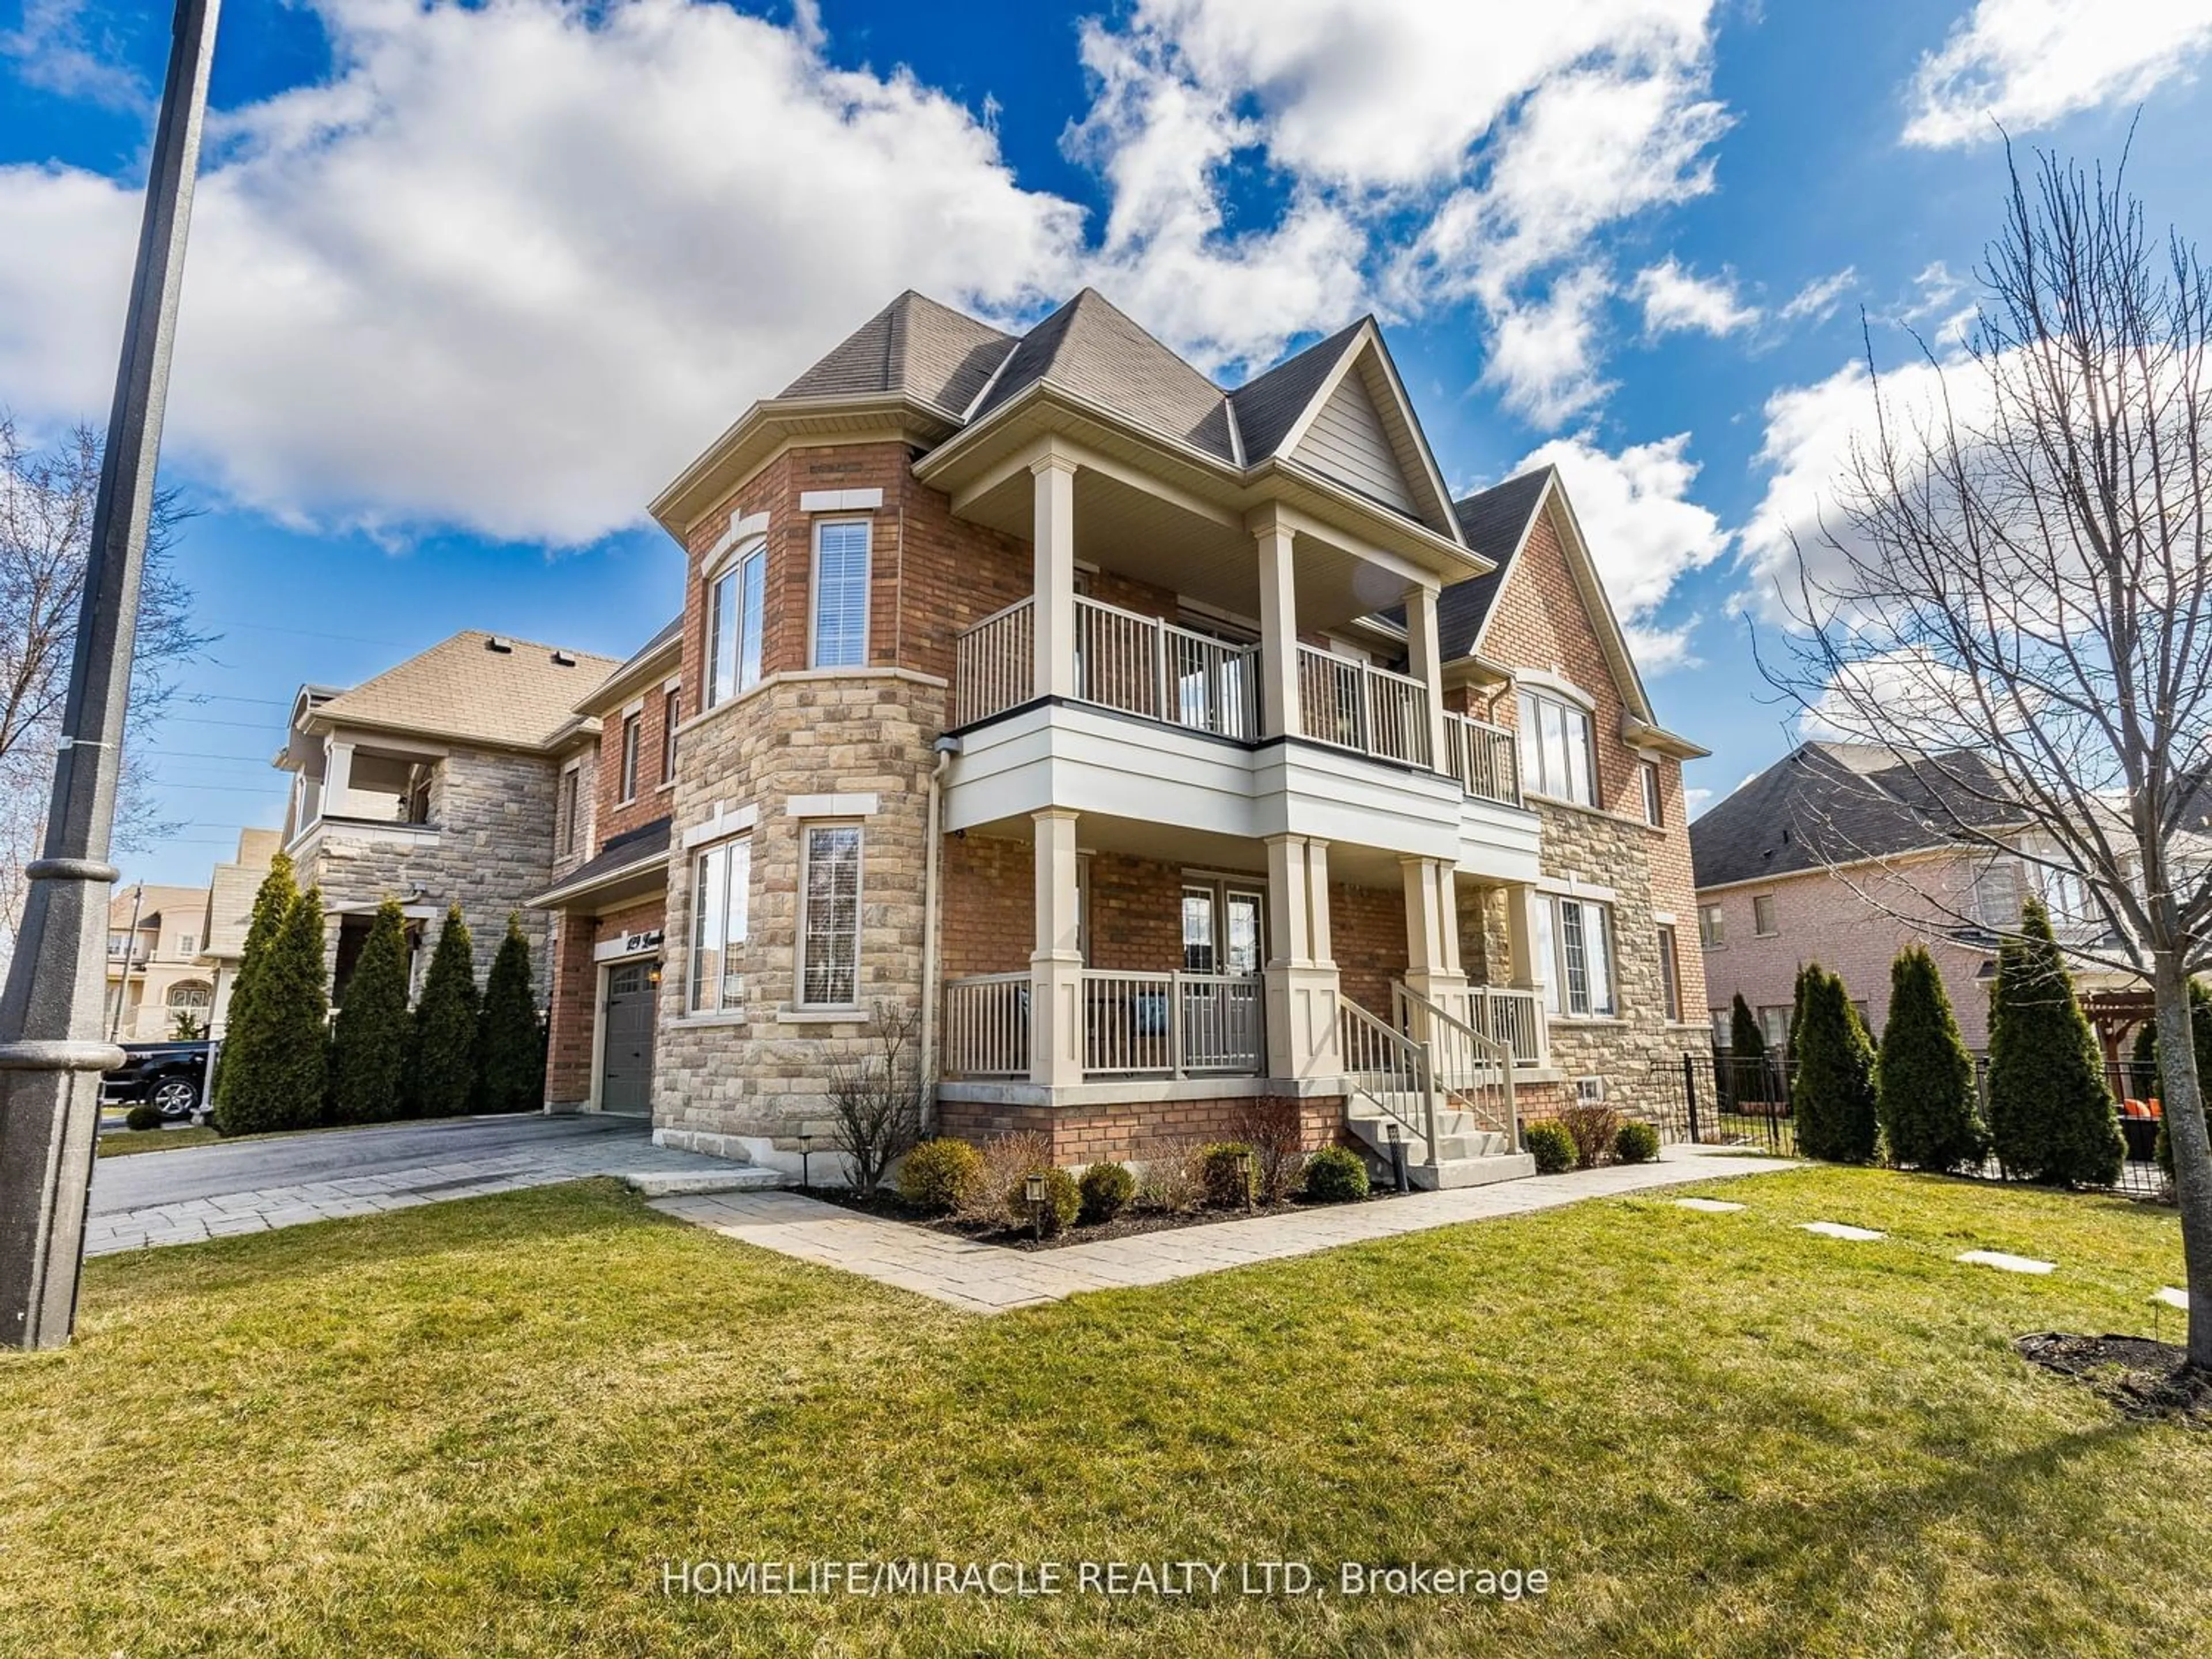 Frontside or backside of a home for 129 Leadership Dr, Brampton Ontario L6Y 5T2